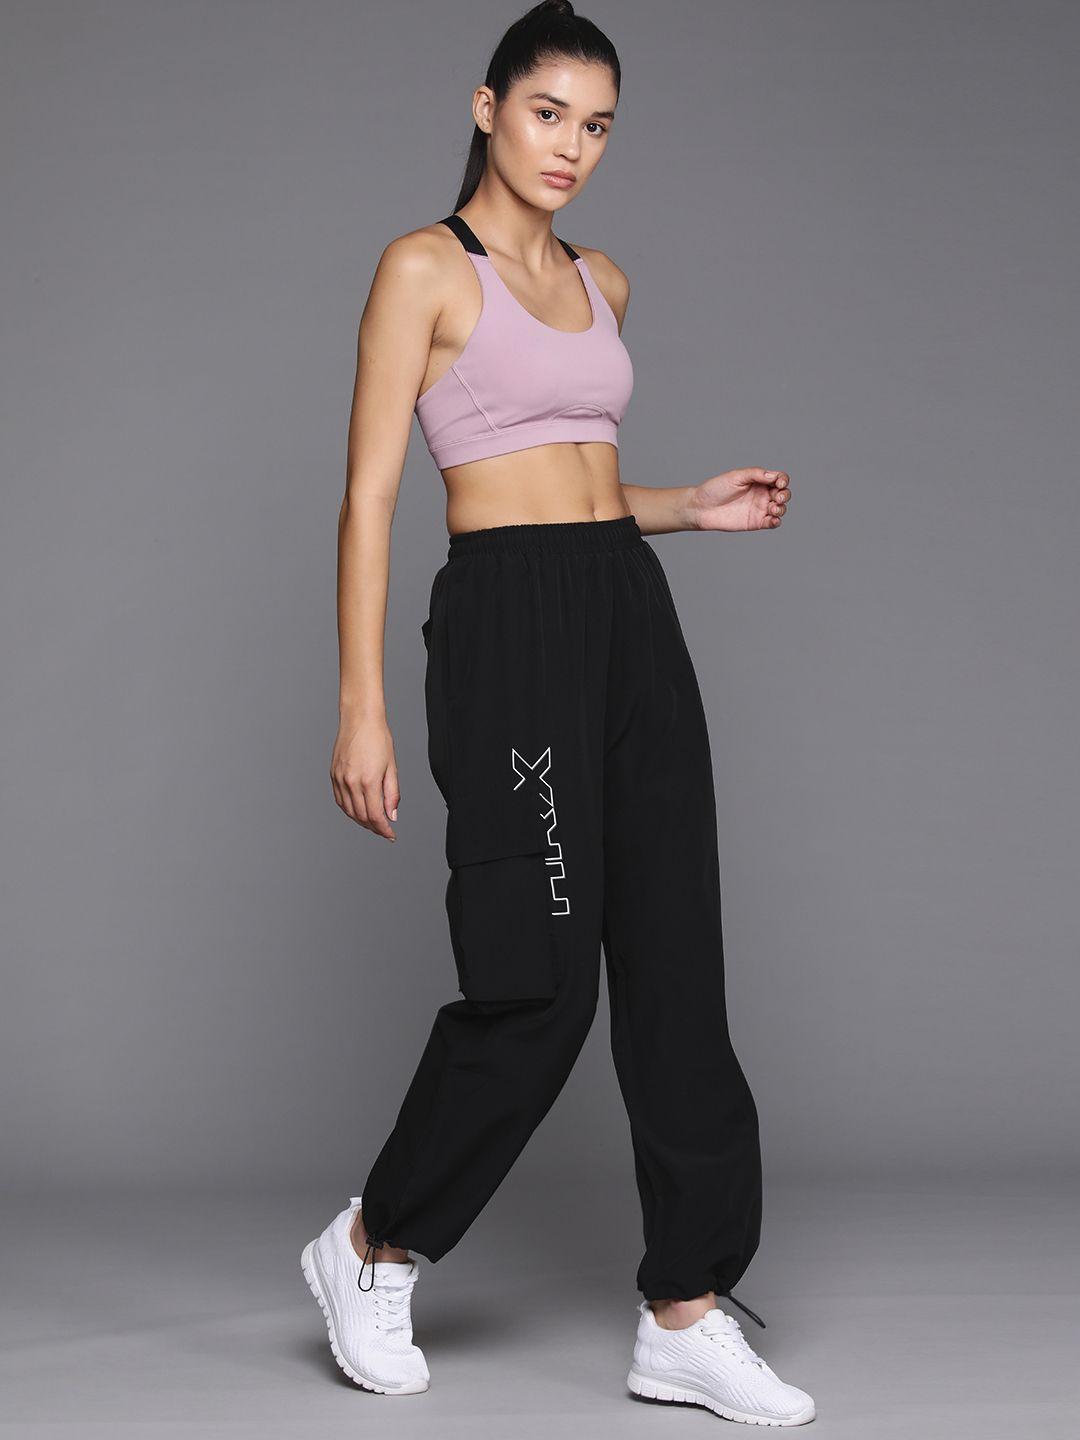 hrx by hrithik roshan relaxed fit running track pants